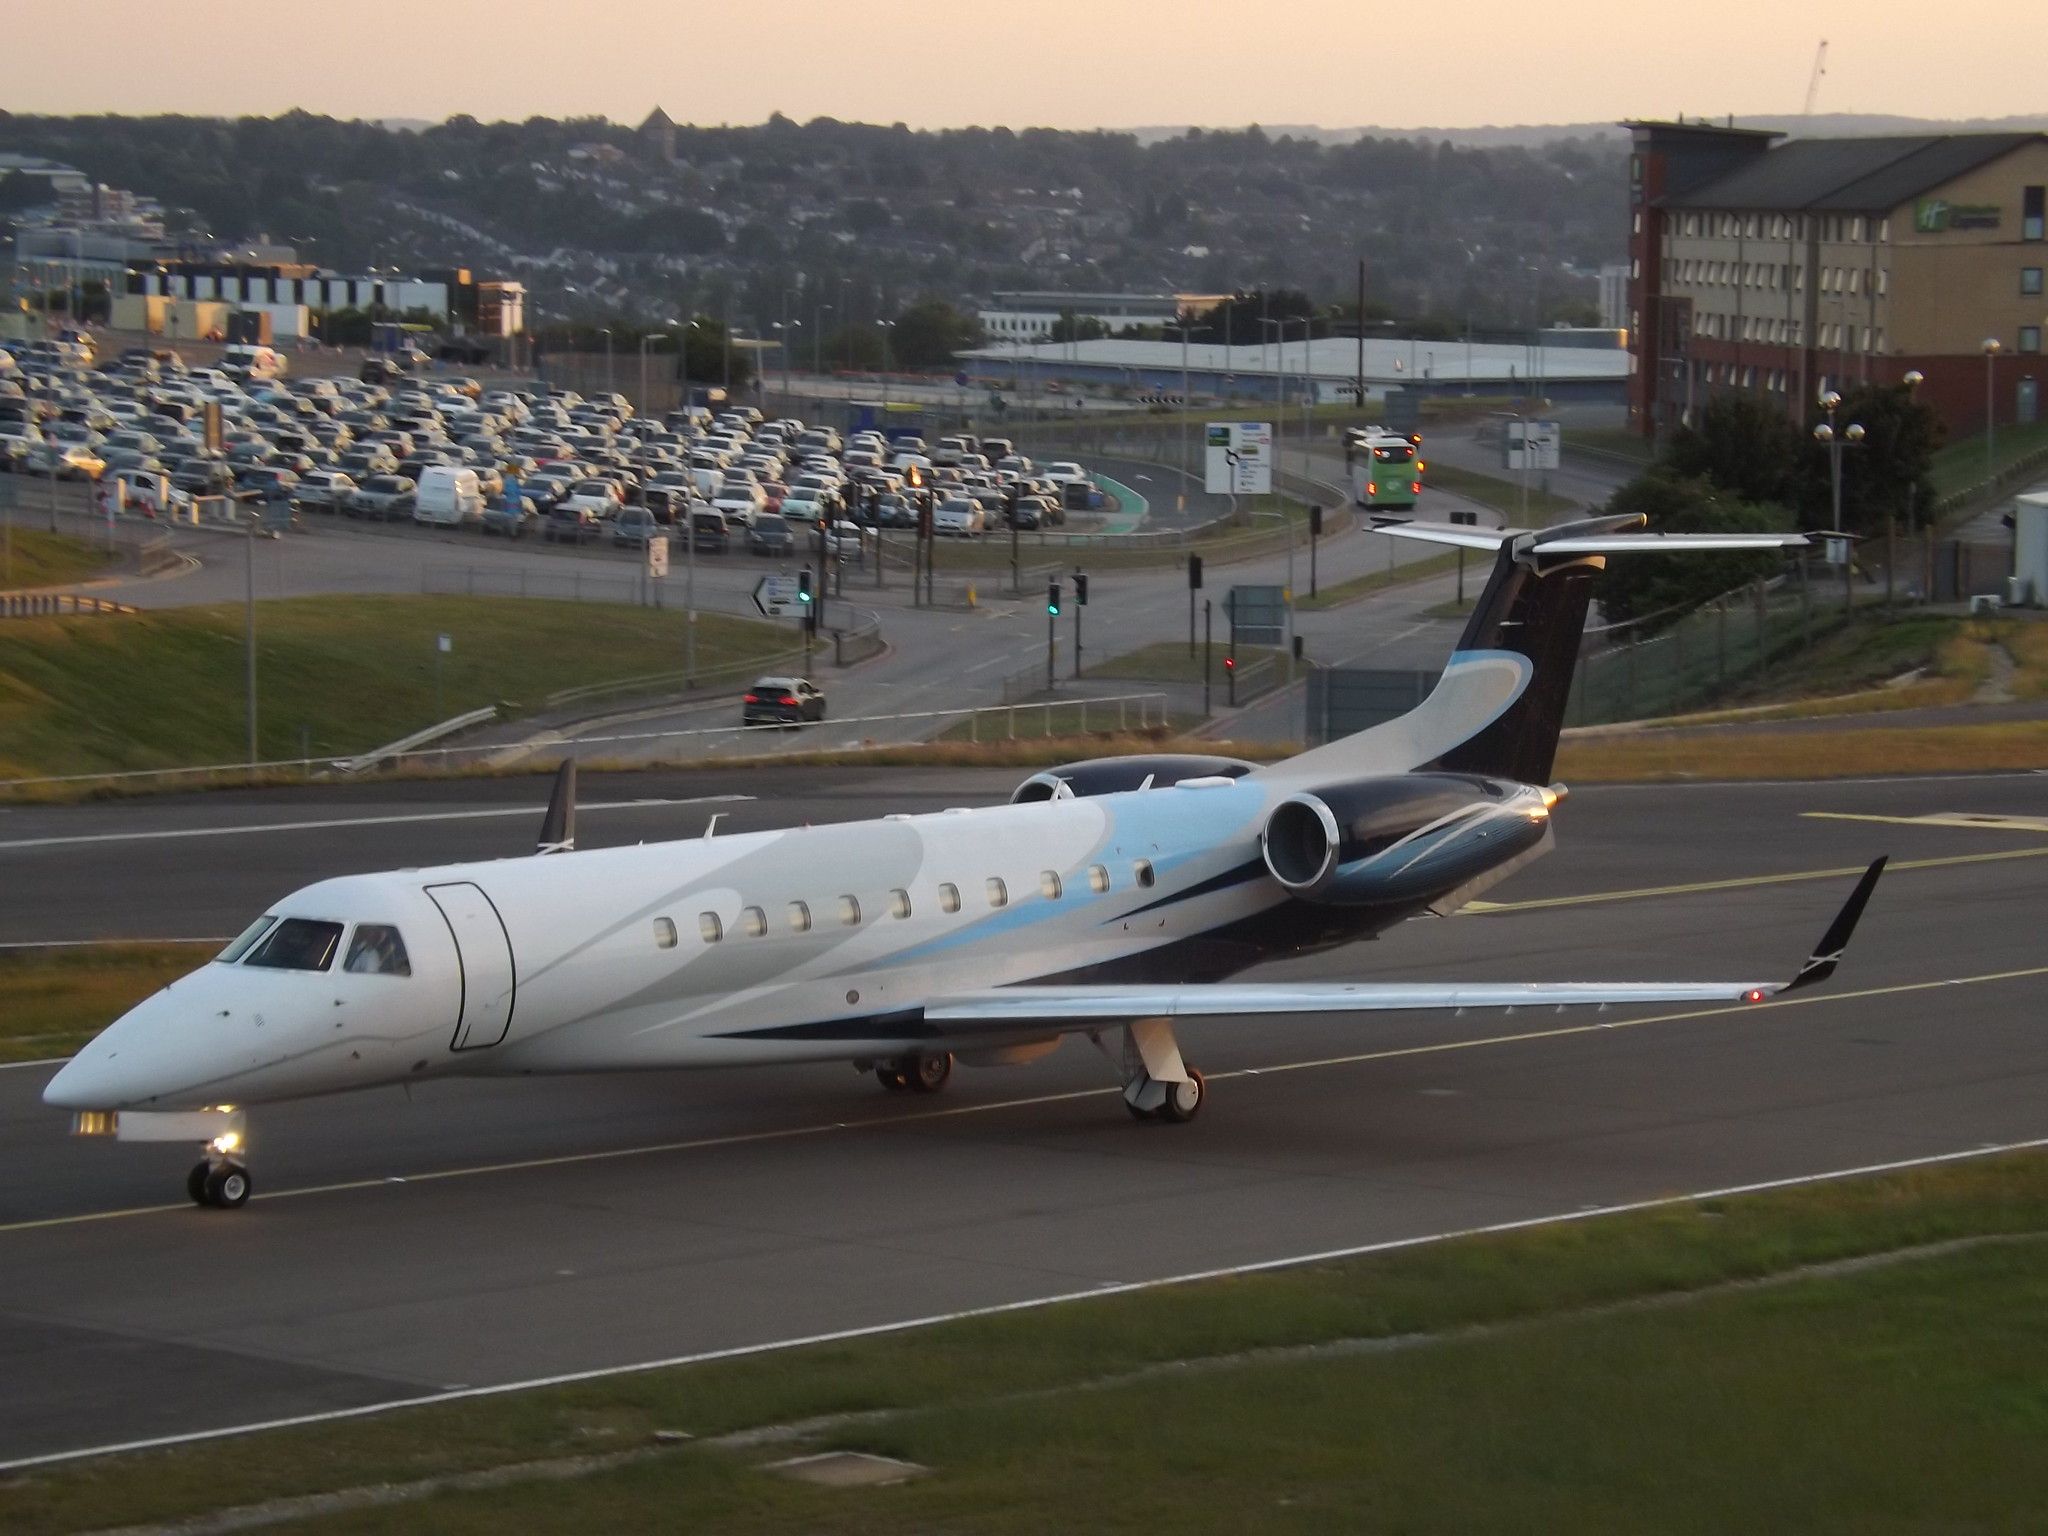 An Embraer Legacy 600 taxiing to the runway.